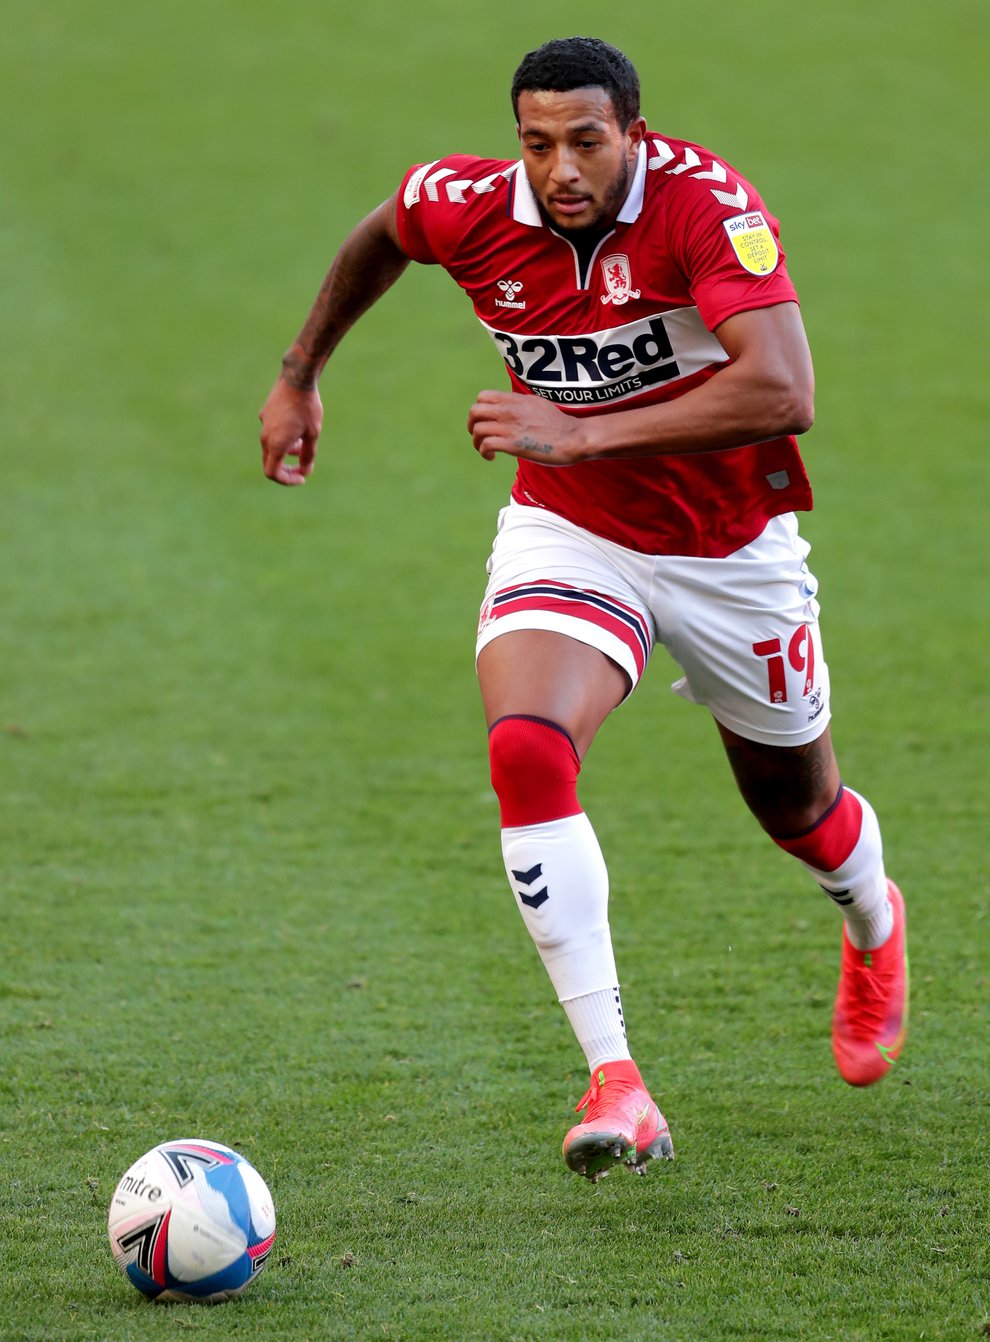 Nathaniel Mendez-Laing has signed for Sheffield Wednesday after leaving Middlesbrough at the end of last season (Richard Sellers/PA).